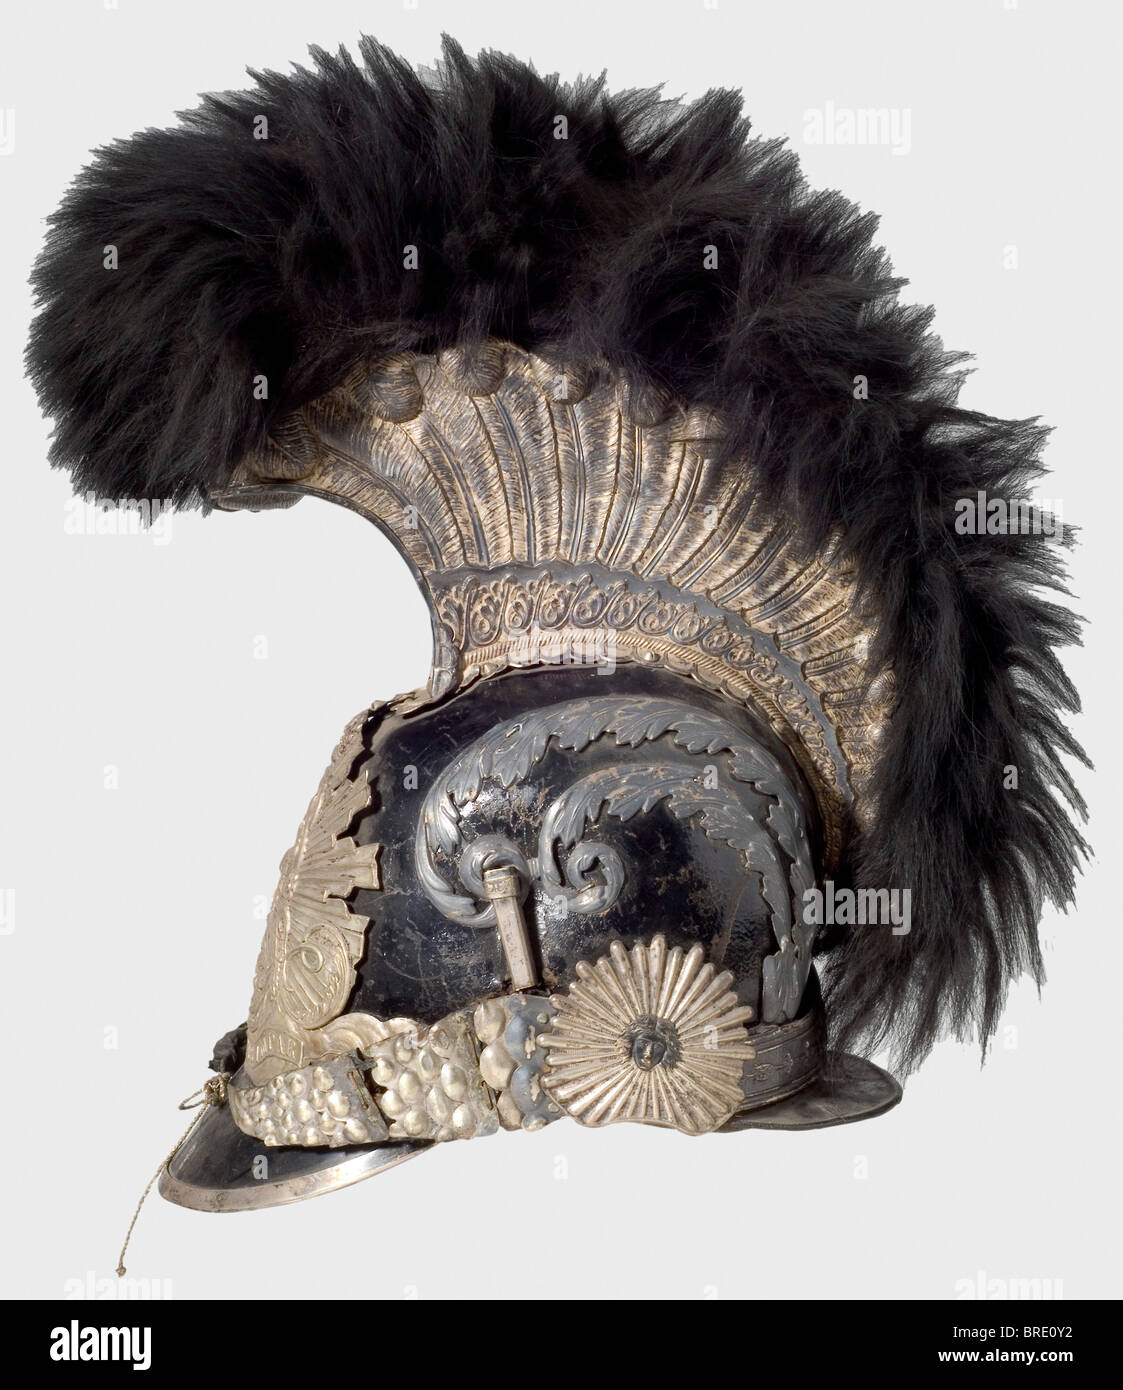 A model 1814 helmet for enlisted men, of the Gardes de Corps du Roi A lacquered leather skull with silver-plated mountings. Tall comb, also silver-plated and bearing fine relief and a black fur crest. Metal chinscales on rosettes with Medusa heads. Feather plume missing. Leather sweatband with silk lining. An illegible owner's name inside the front peak. Silver-plated pieces tarnished. Comb lightly indented on the left side, the leather backing of the chinstrap is torn, and the velvet lining is badly worn. The interior fittings display marks of wear and age. He, Stock Photo